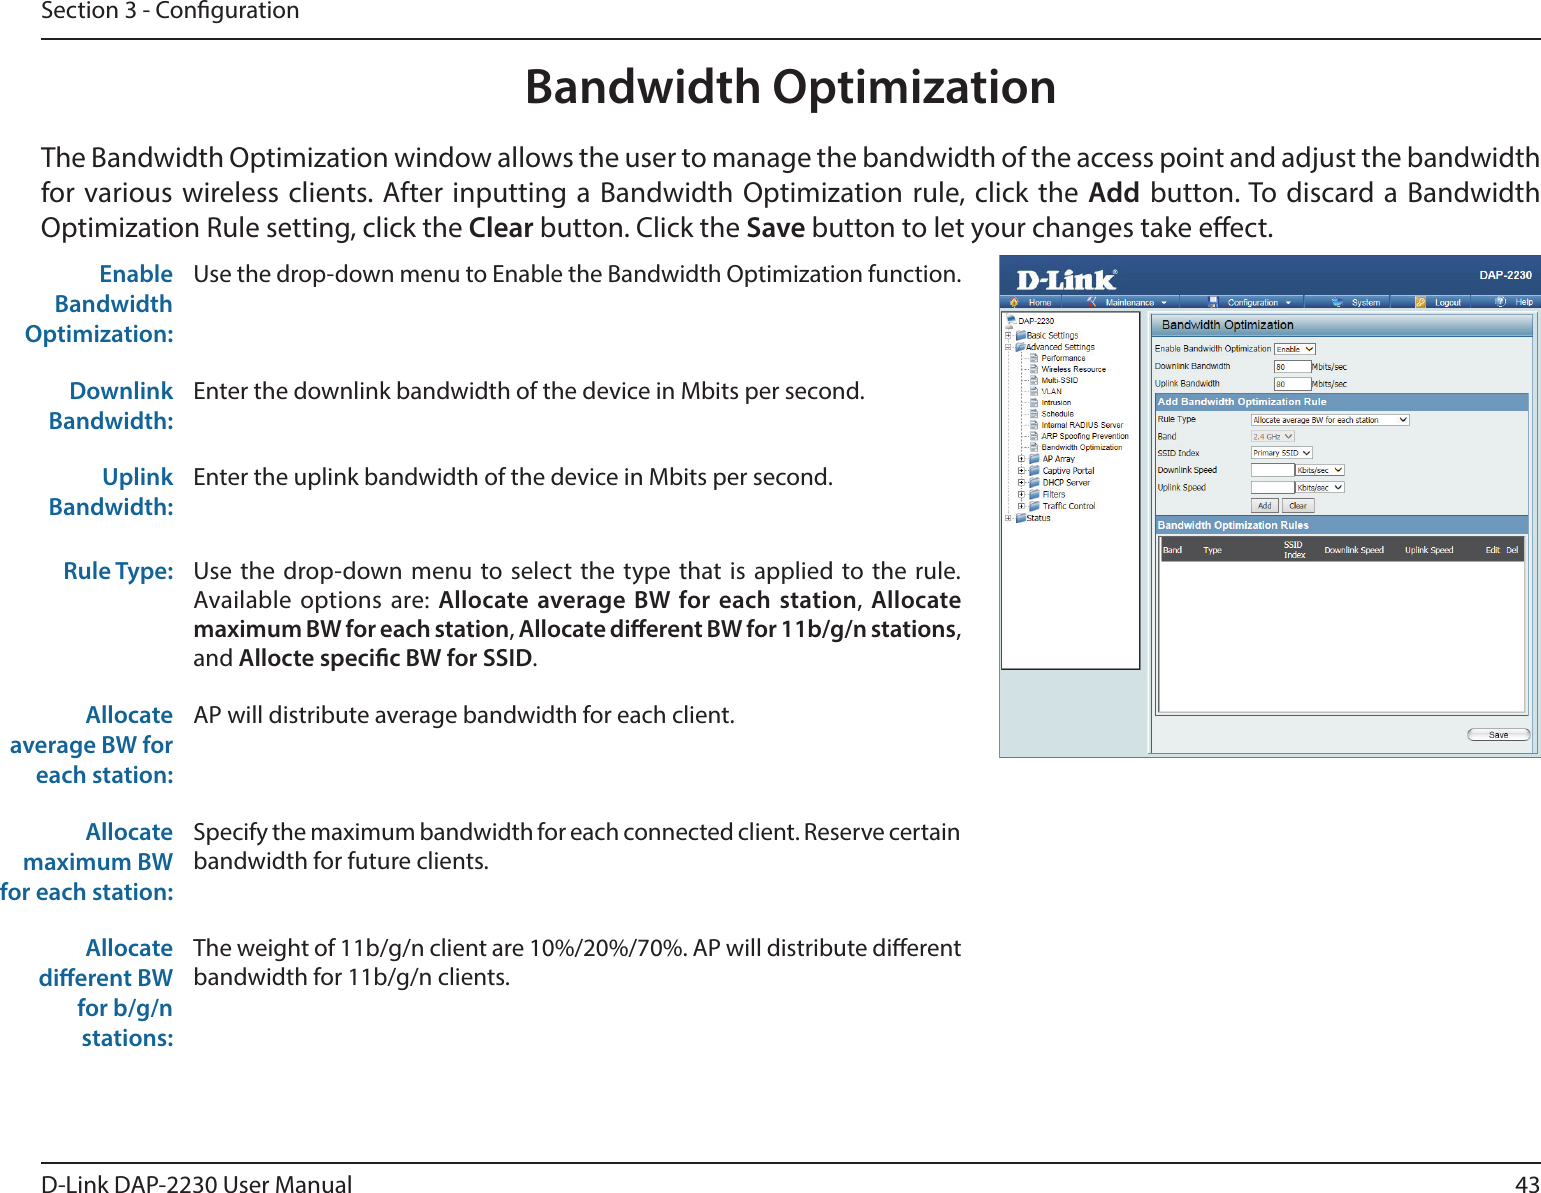 43D-Link DAP-2230 User ManualSection 3 - CongurationBandwidth OptimizationThe Bandwidth Optimization window allows the user to manage the bandwidth of the access point and adjust the bandwidth for various wireless clients. After inputting a Bandwidth Optimization rule, click the Add button. To discard a Bandwidth Optimization Rule setting, click the Clear button. Click the Save button to let your changes take eect.Enable Bandwidth Optimization:Use the drop-down menu to Enable the Bandwidth Optimization function. Downlink Bandwidth:Enter the downlink bandwidth of the device in Mbits per second.Uplink Bandwidth:Enter the uplink bandwidth of the device in Mbits per second.Rule Type: Use the drop-down menu to select the type that is applied to the rule. Available options are: Allocate average BW for each station, Allocate maximum BW for each station, Allocate dierent BW for 11b/g/n stations, and Allocte specic BW for SSID.Allocate average BW for each station:AP will distribute average bandwidth for each client.Allocate maximum BW for each station: Specify the maximum bandwidth for each connected client. Reserve certain bandwidth for future clients.Allocate dierent BW for b/g/n stations:The weight of 11b/g/n client are 10%/20%/70%. AP will distribute dierent bandwidth for 11b/g/n clients. 